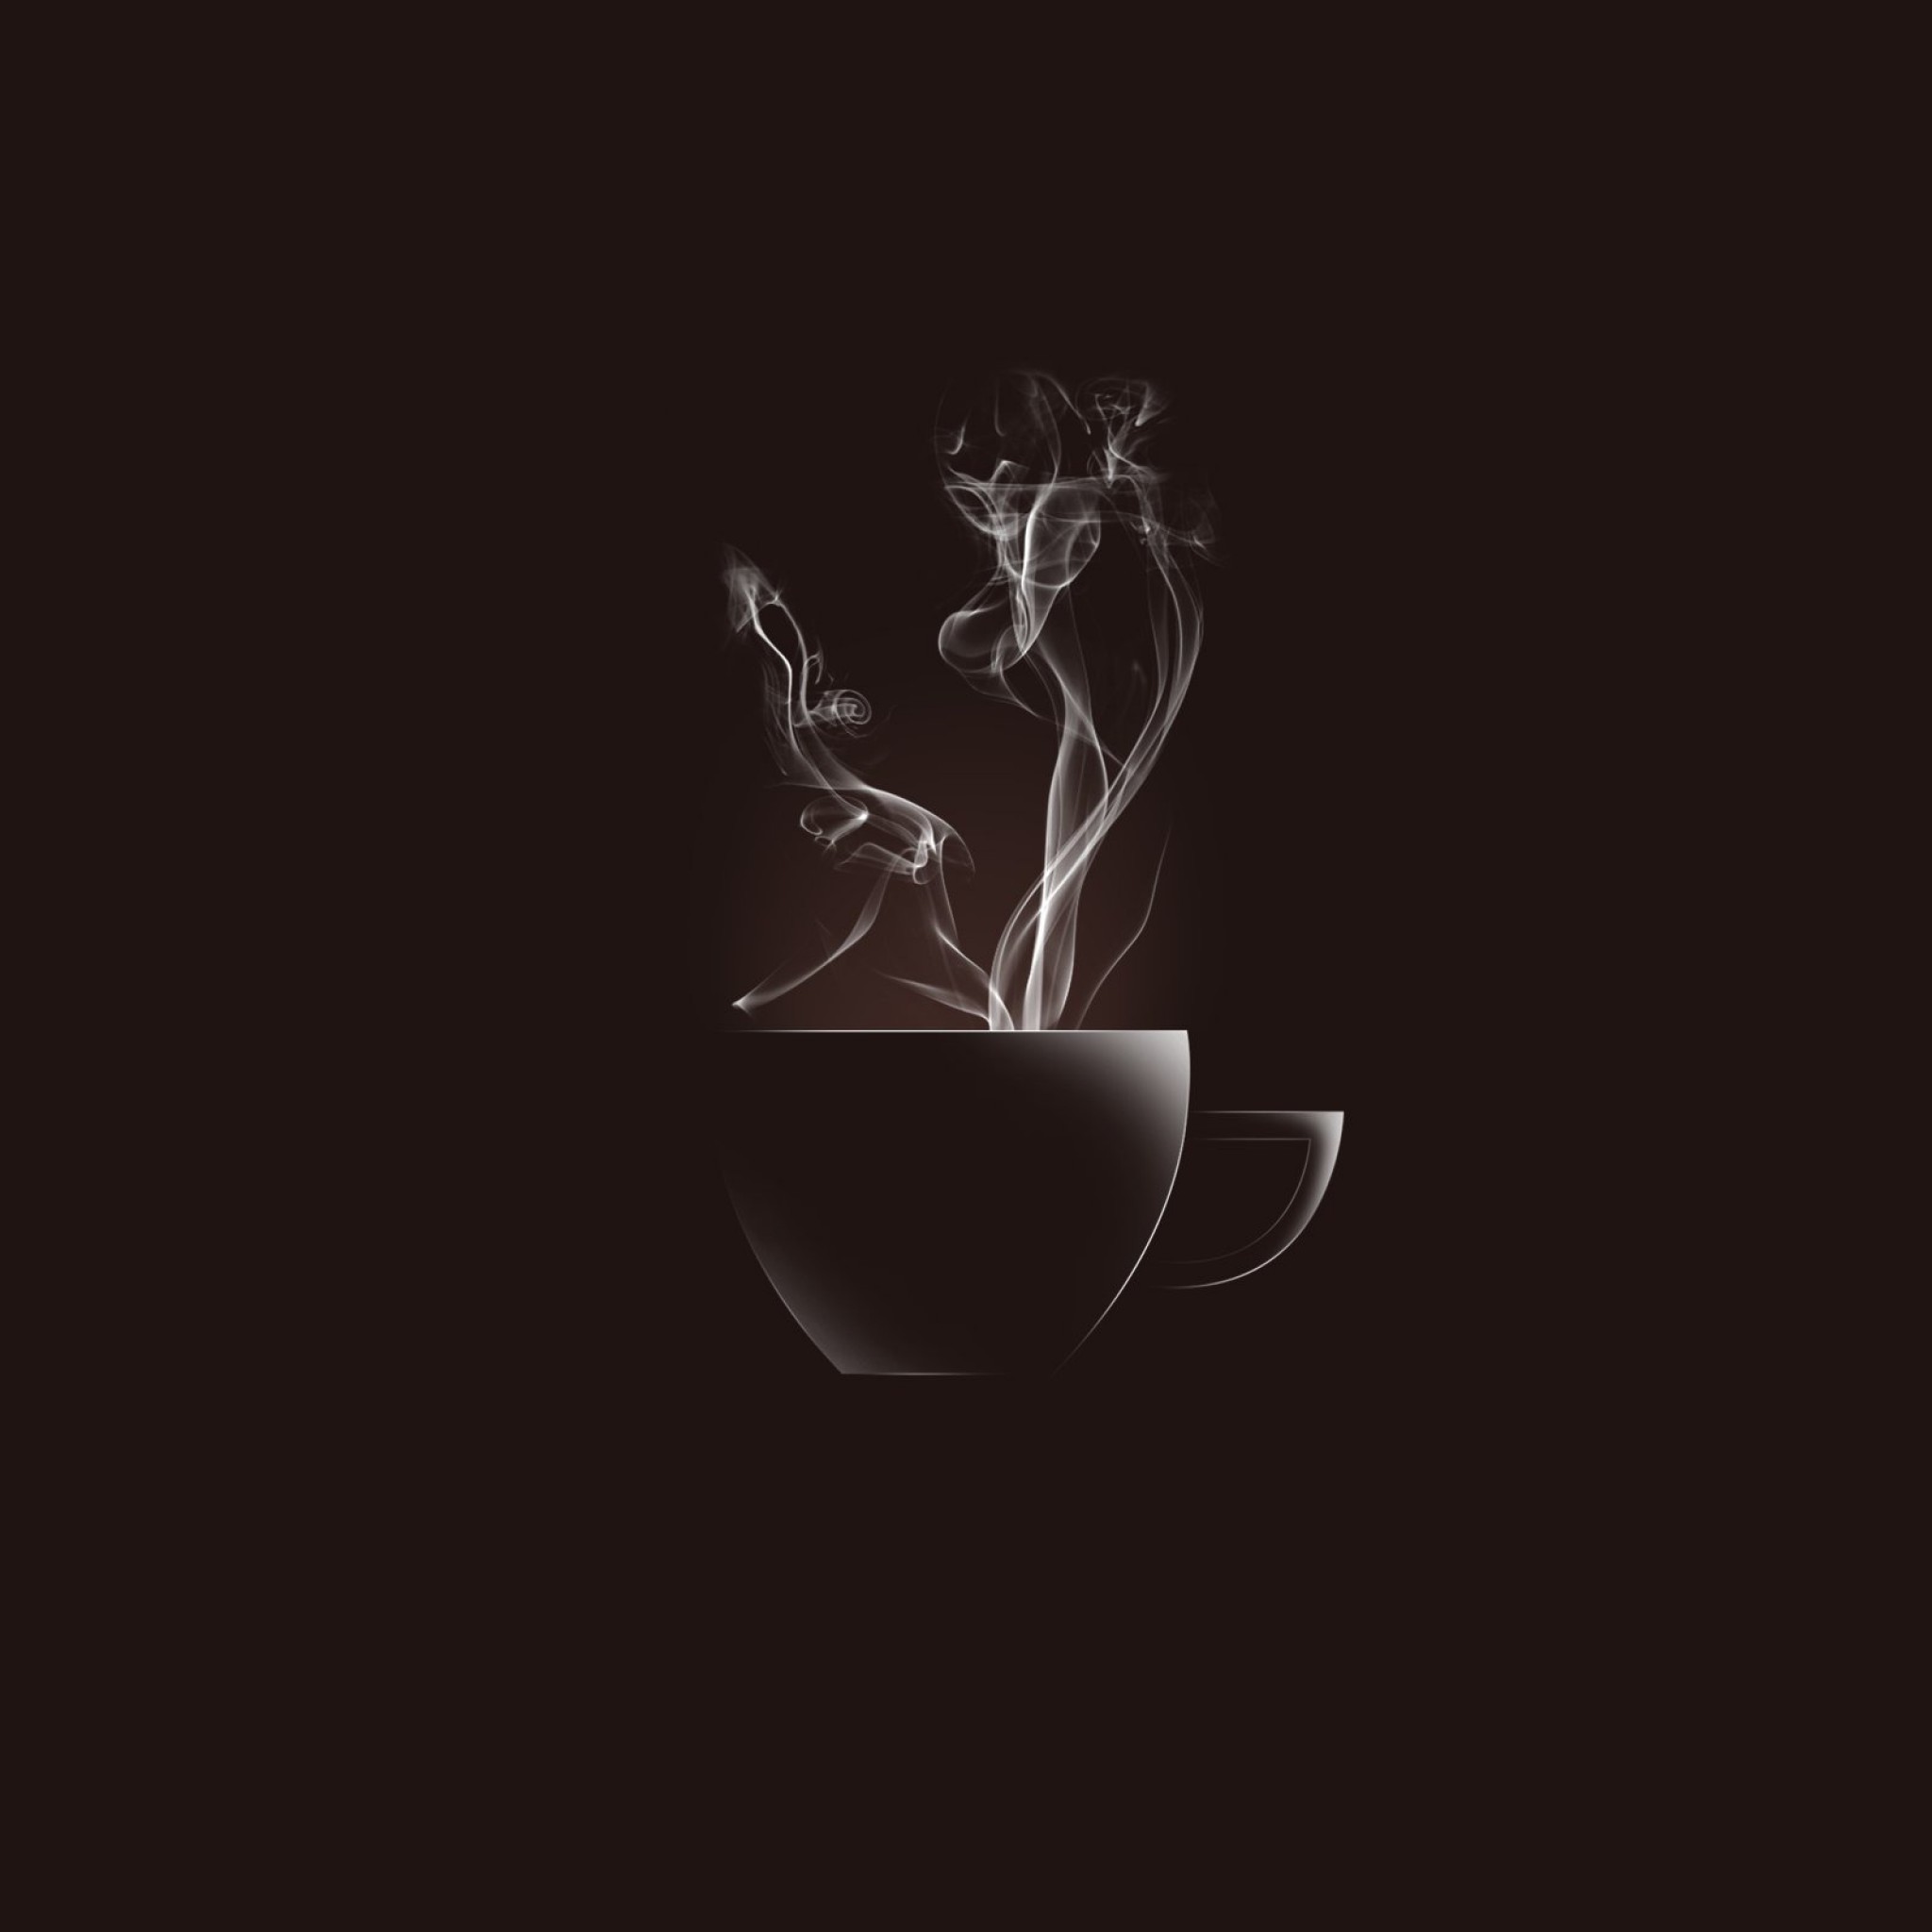 Iphone 5 Wallpaper Coffee Favourite Pictures Ipad タブレット壁紙ギャラリー